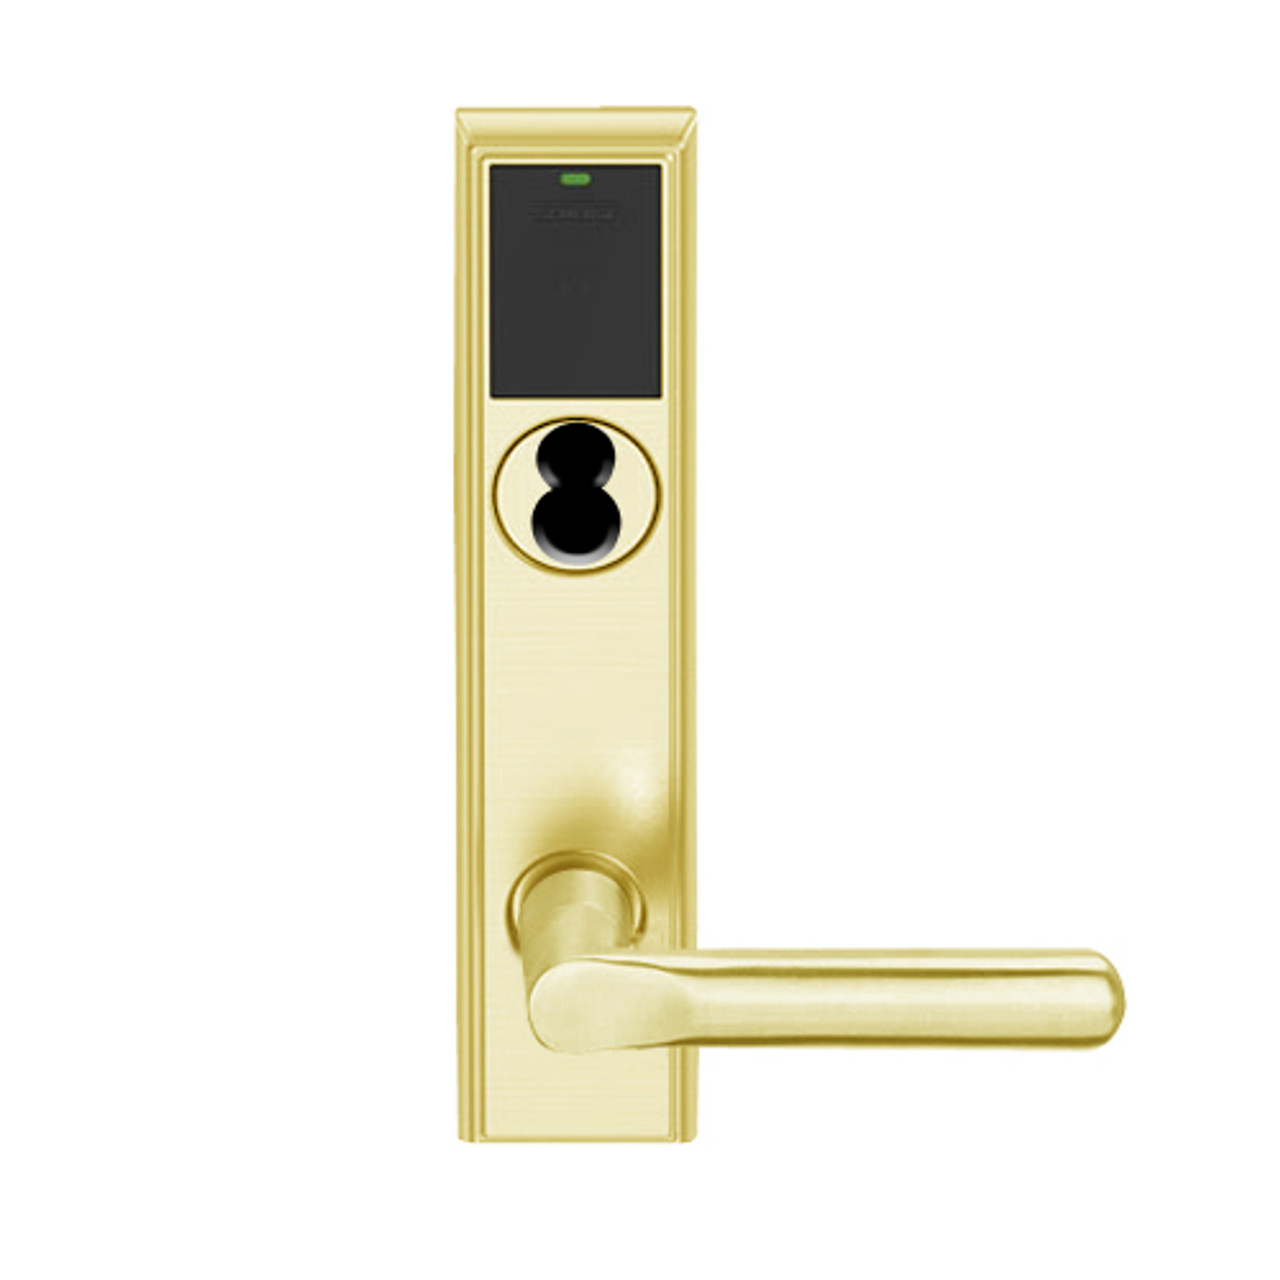 LEMS-ADD-BD-18-605 Schlage Storeroom Wireless Addison Mortise Lock with LED and 18 Lever Prepped for SFIC in Bright Brass